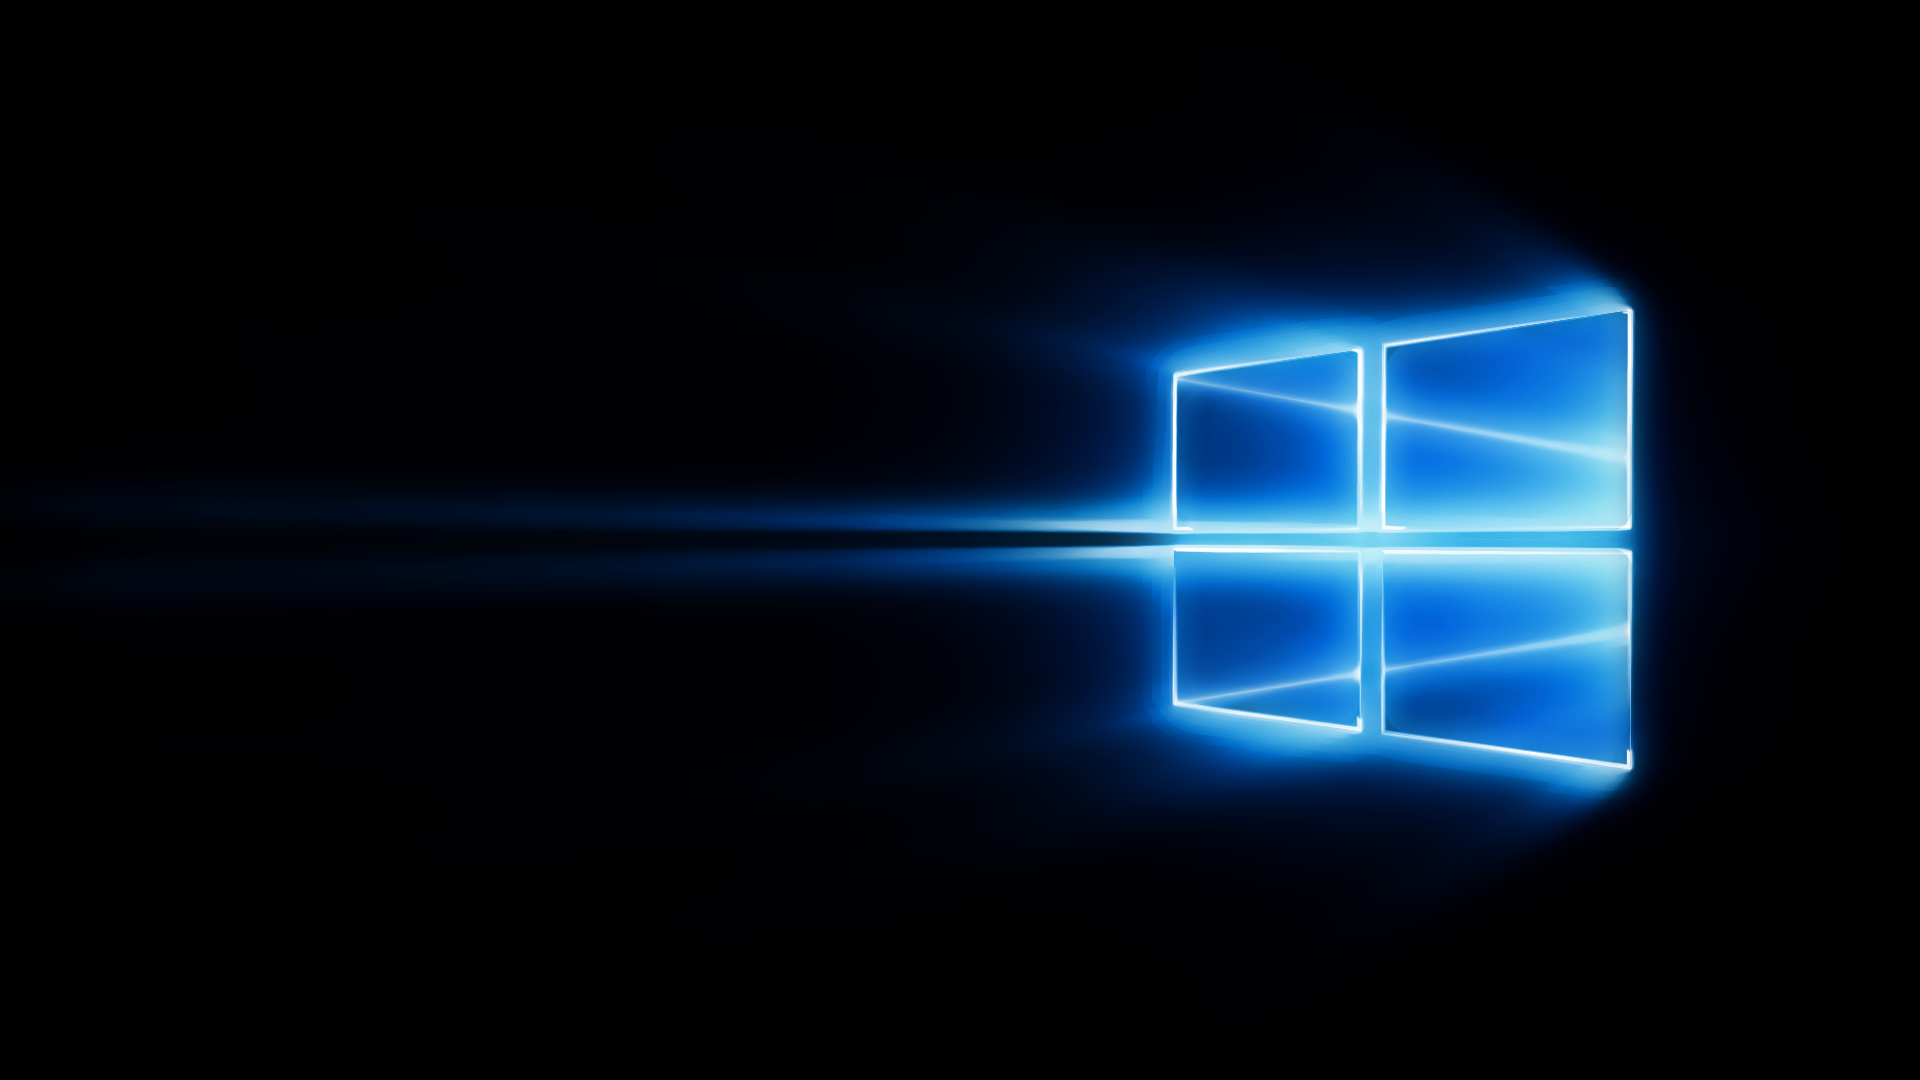 Windows 10 Background Wallpapers 2858 - HD Wallpapers Site